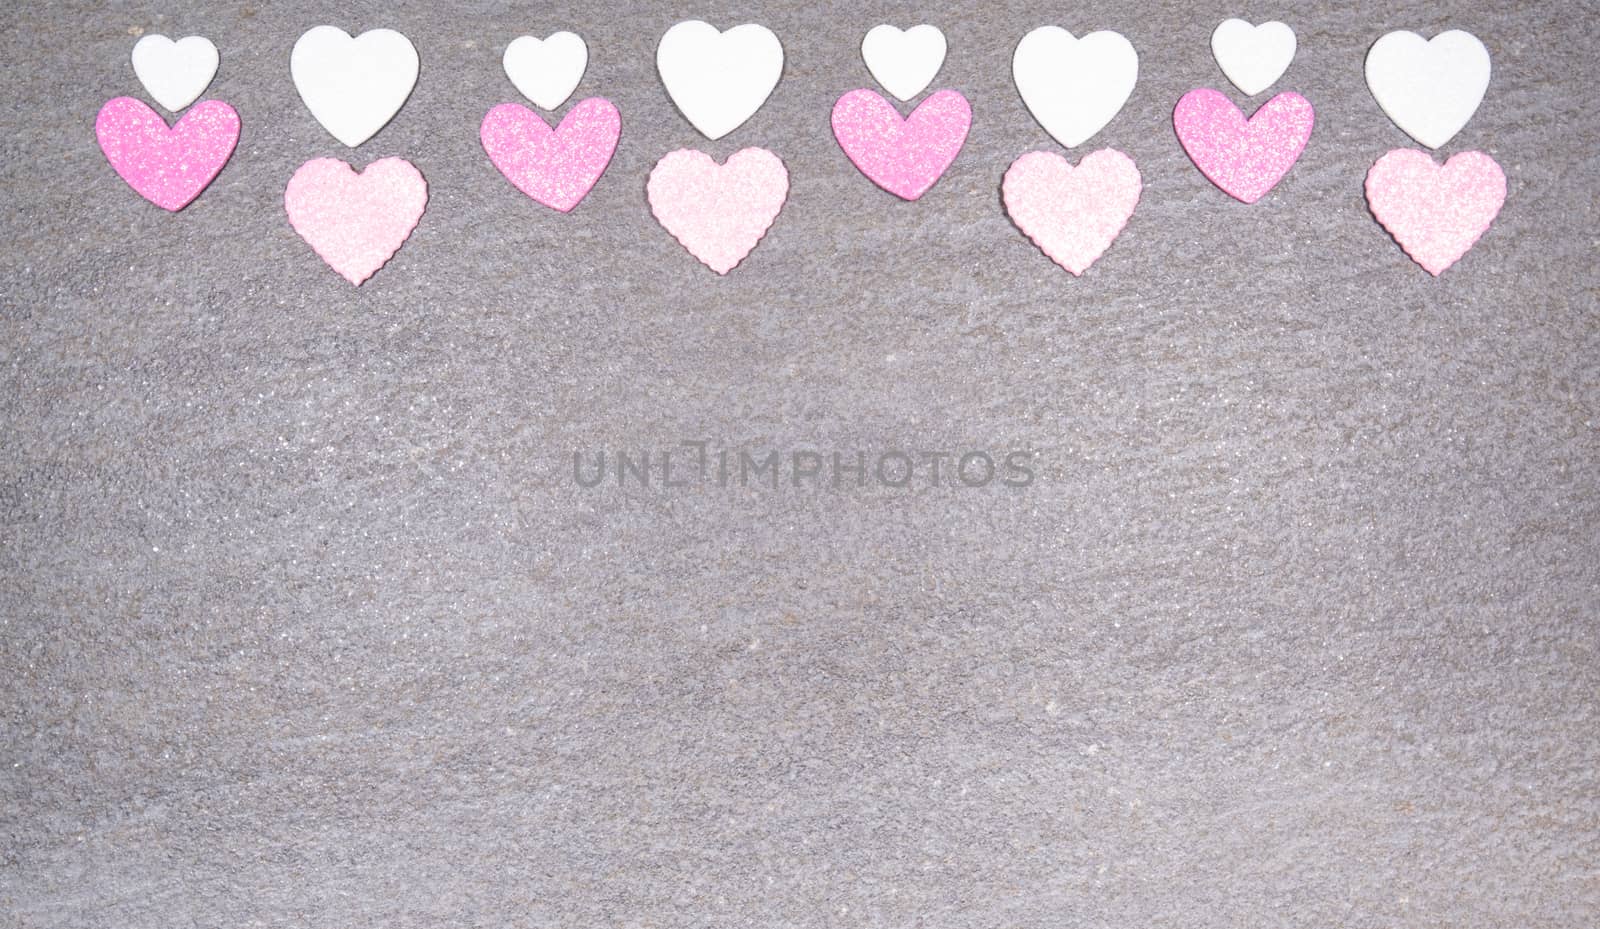 gray granite background with pink and white hearts for valentine by jp_chretien